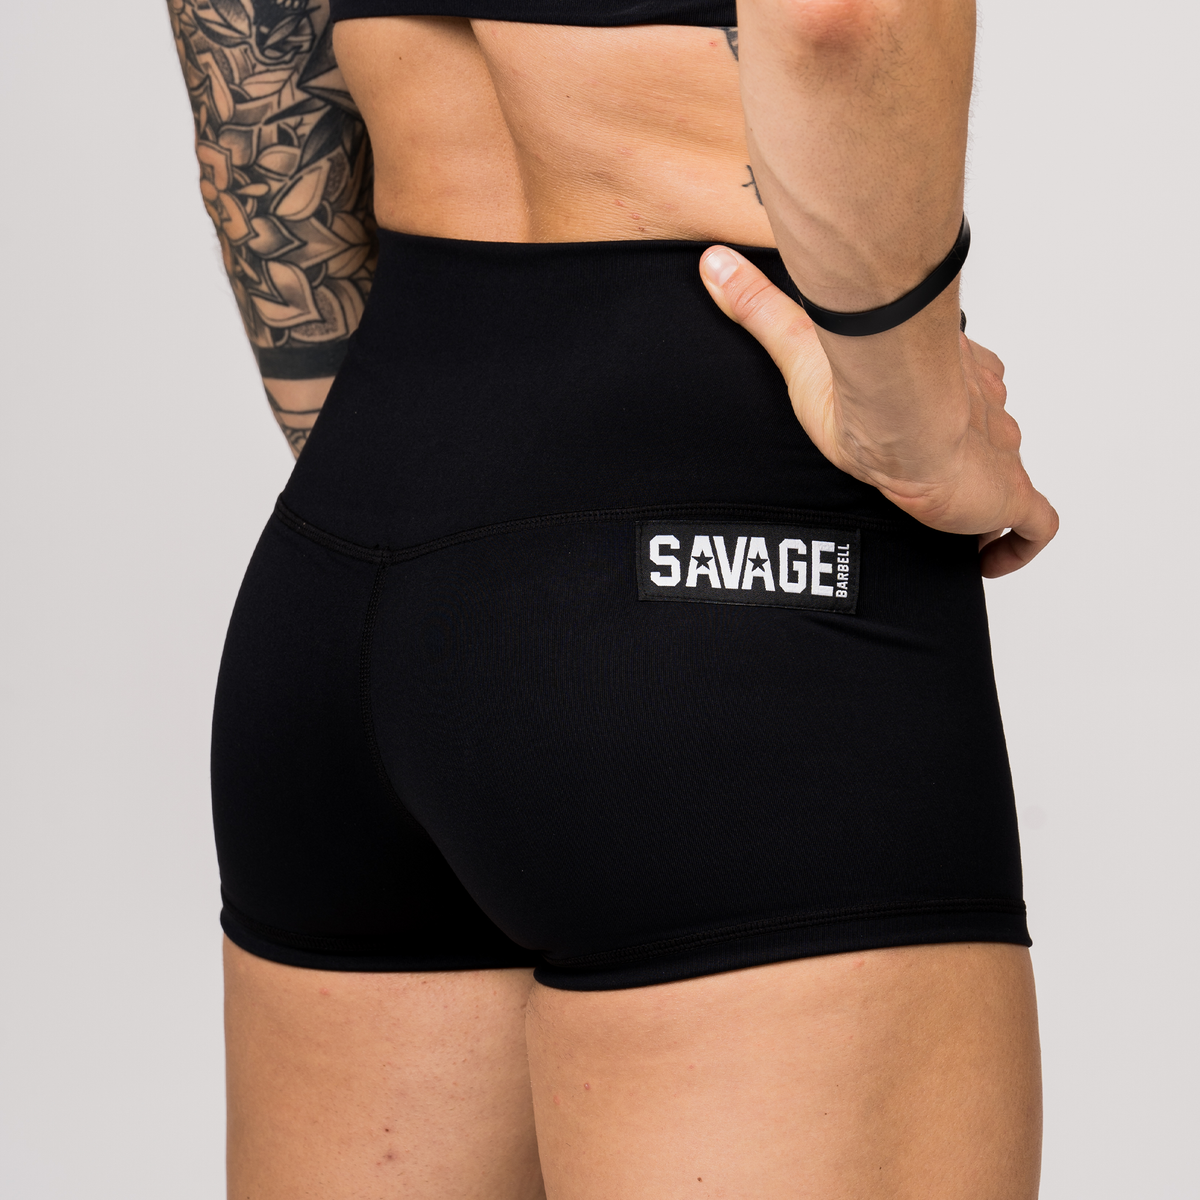 Women's Black Spandex Booty Shorts  Savage Barbell - Savage Barbell Apparel